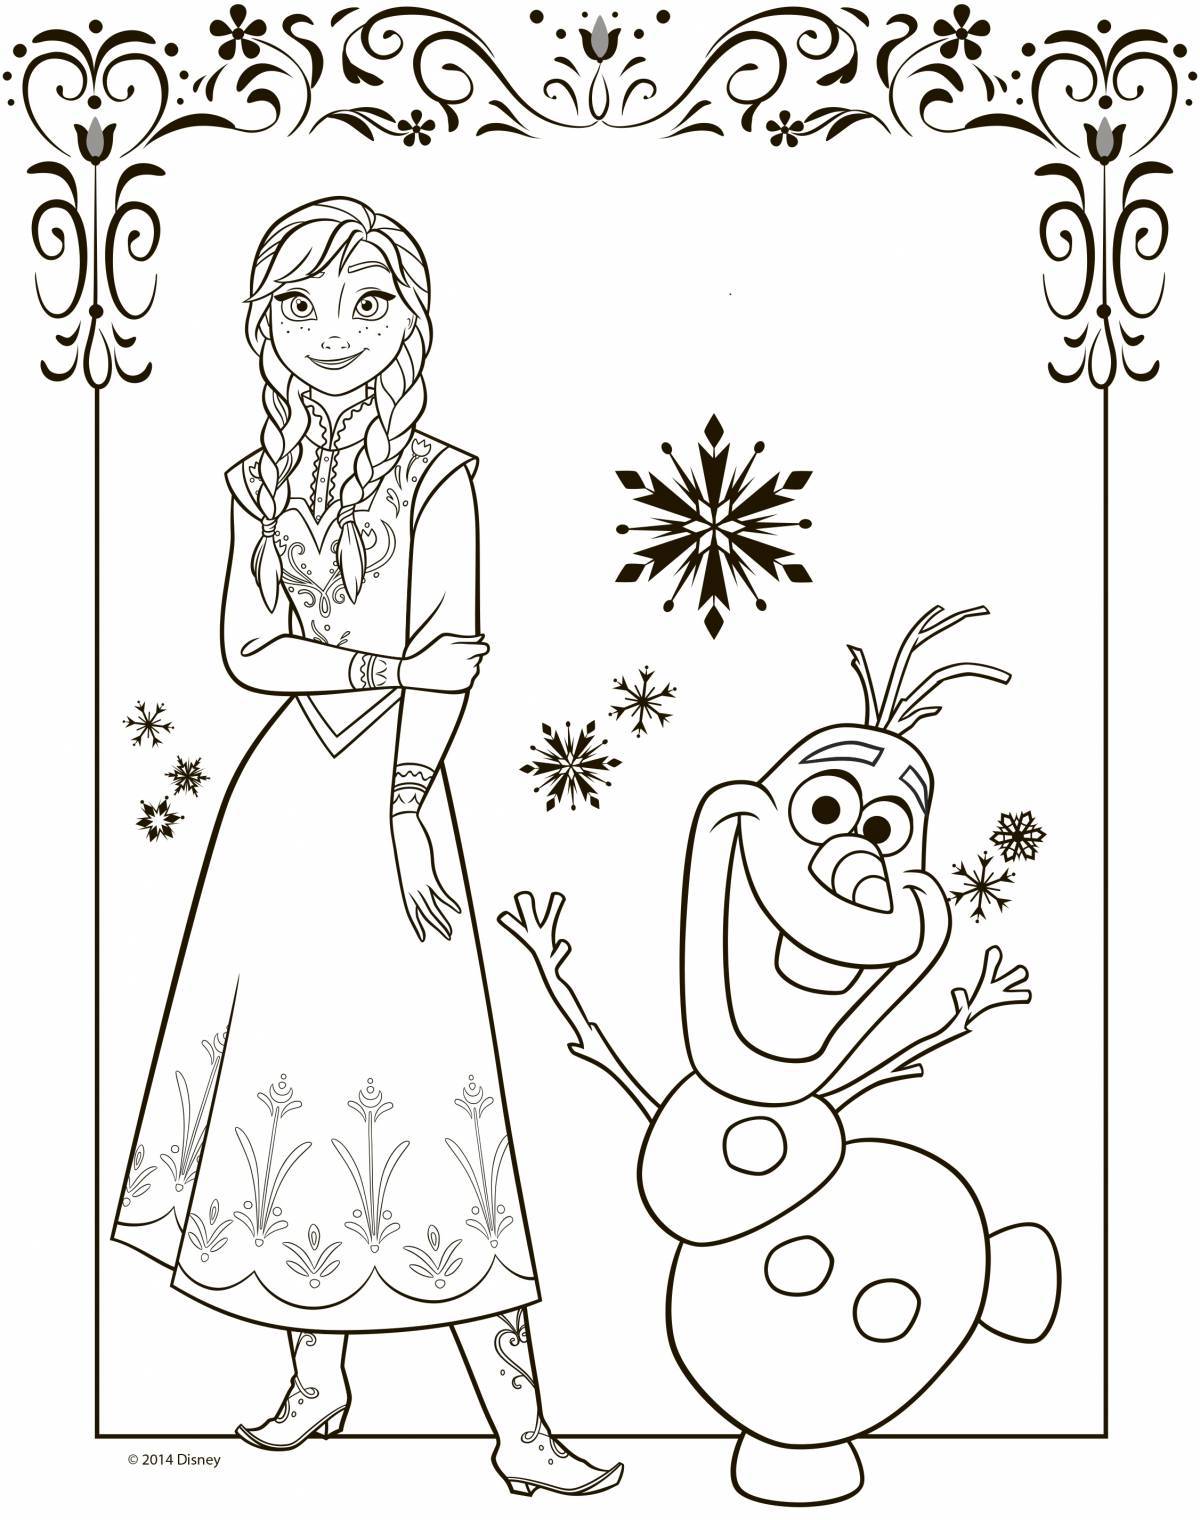 Grand cold heart coloring pages for kids